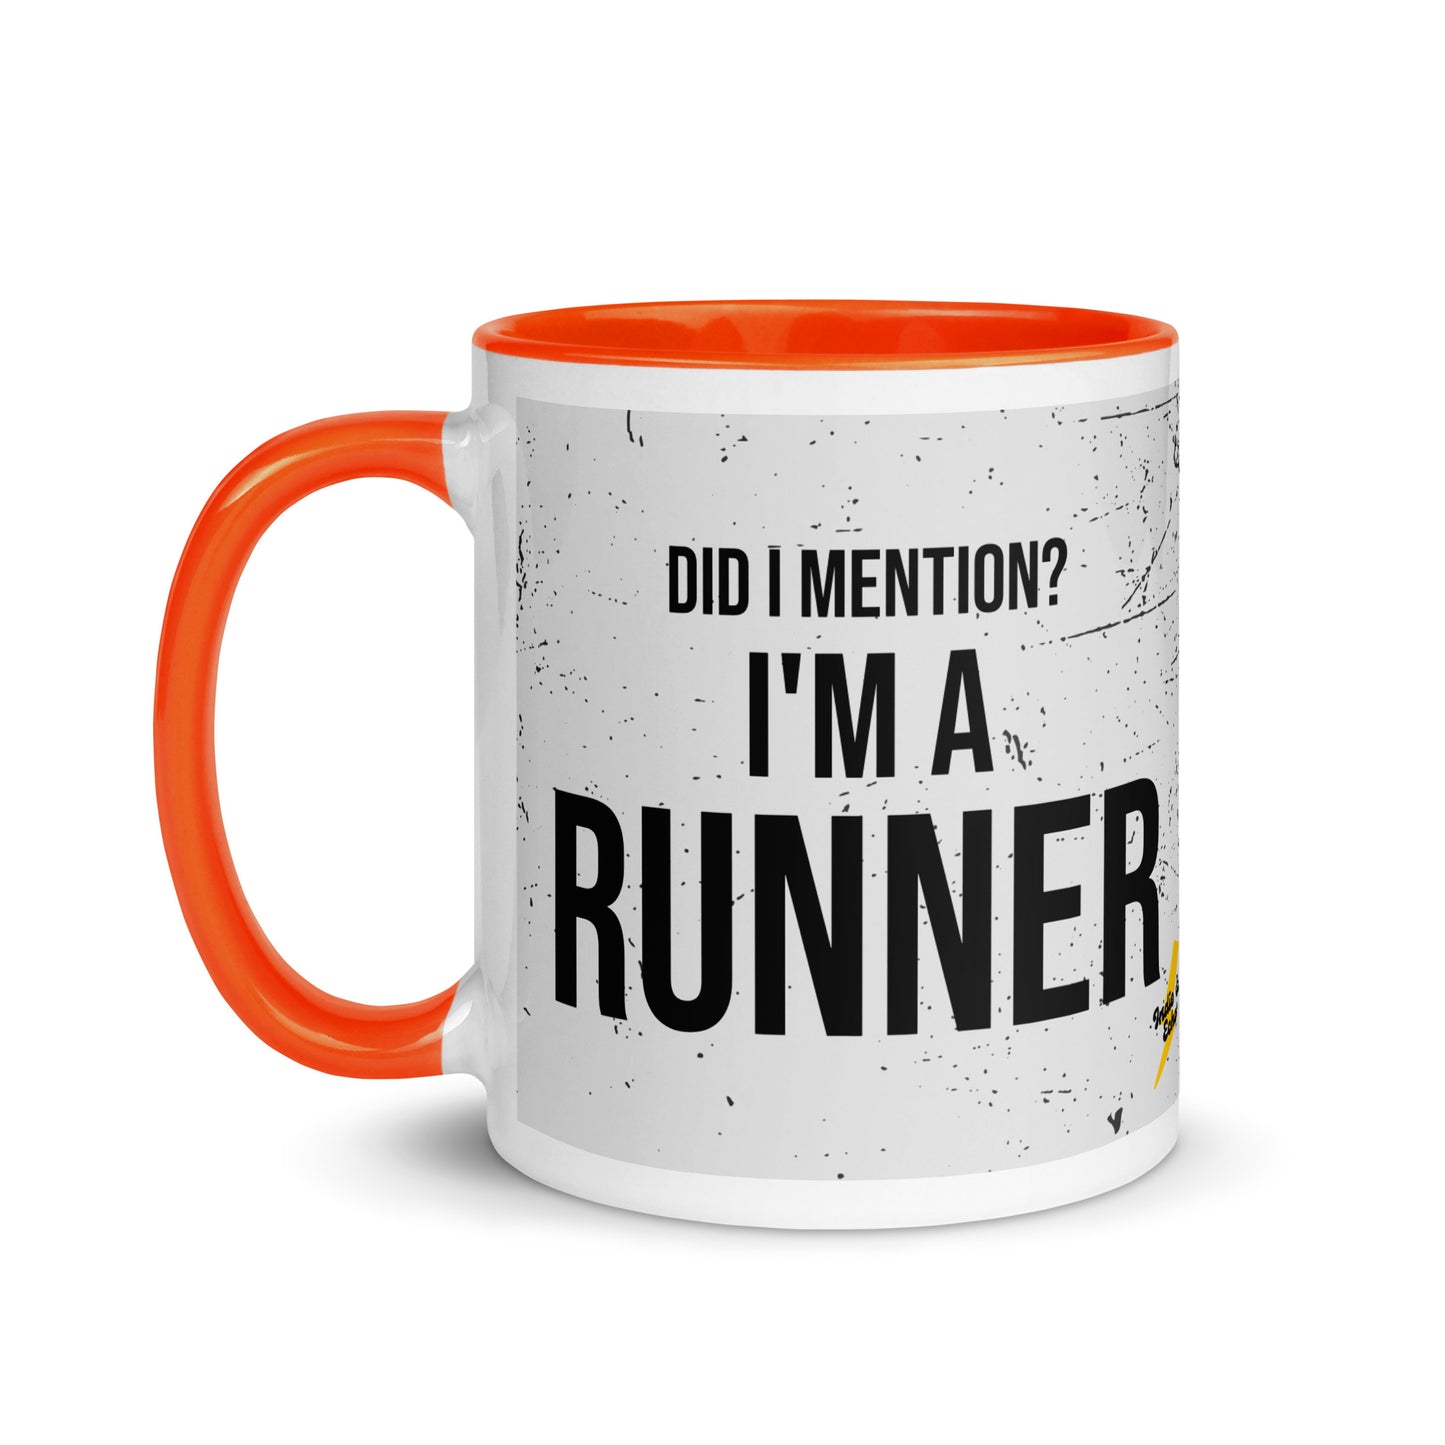 Mug with orange handle and a grey splatter print design with the phrase did I mention? I'm a runner across the front. A nice gift for a running friend. 